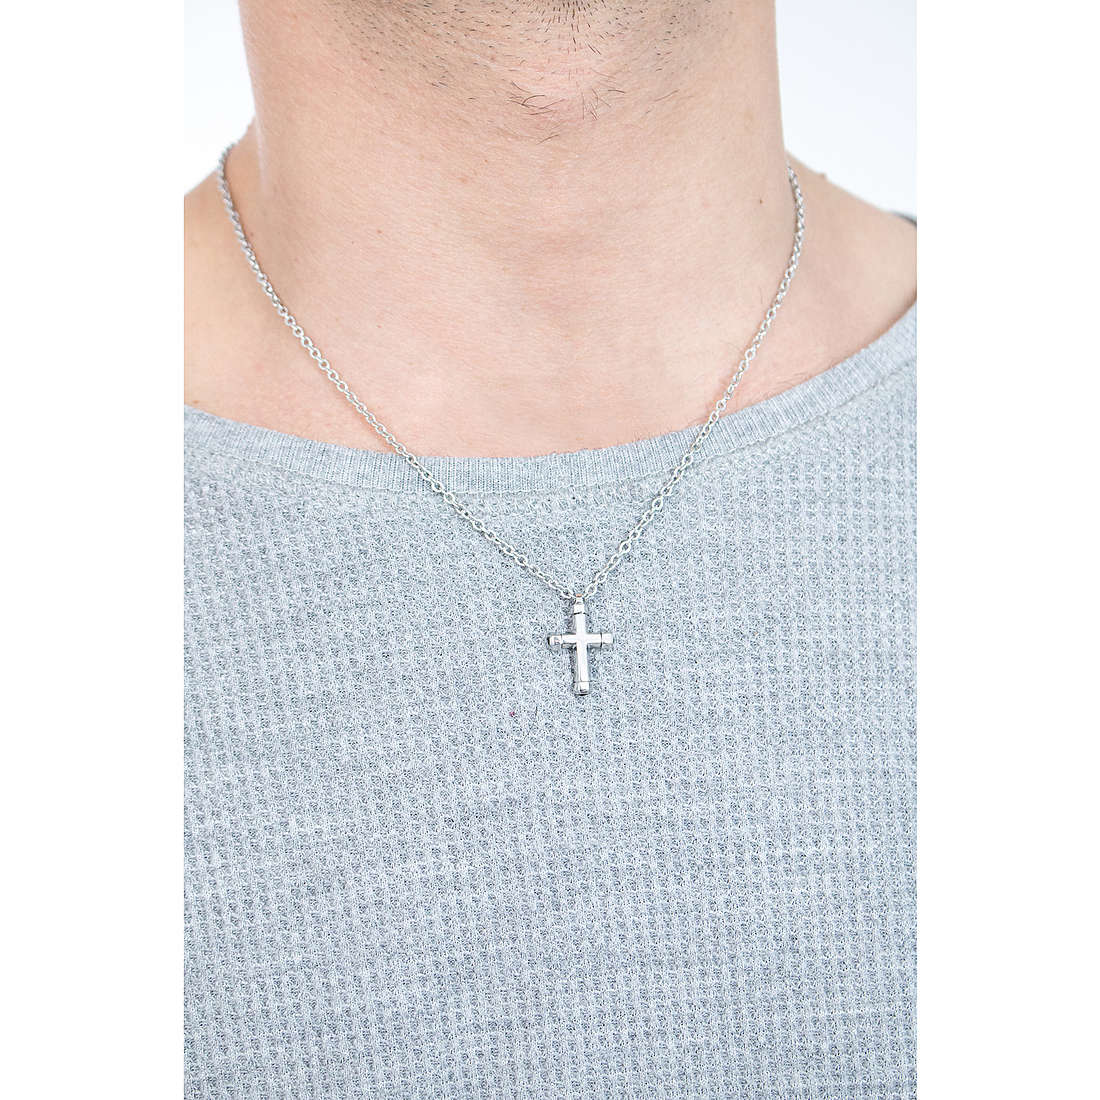 Brosway necklaces Crux man BRX02 wearing